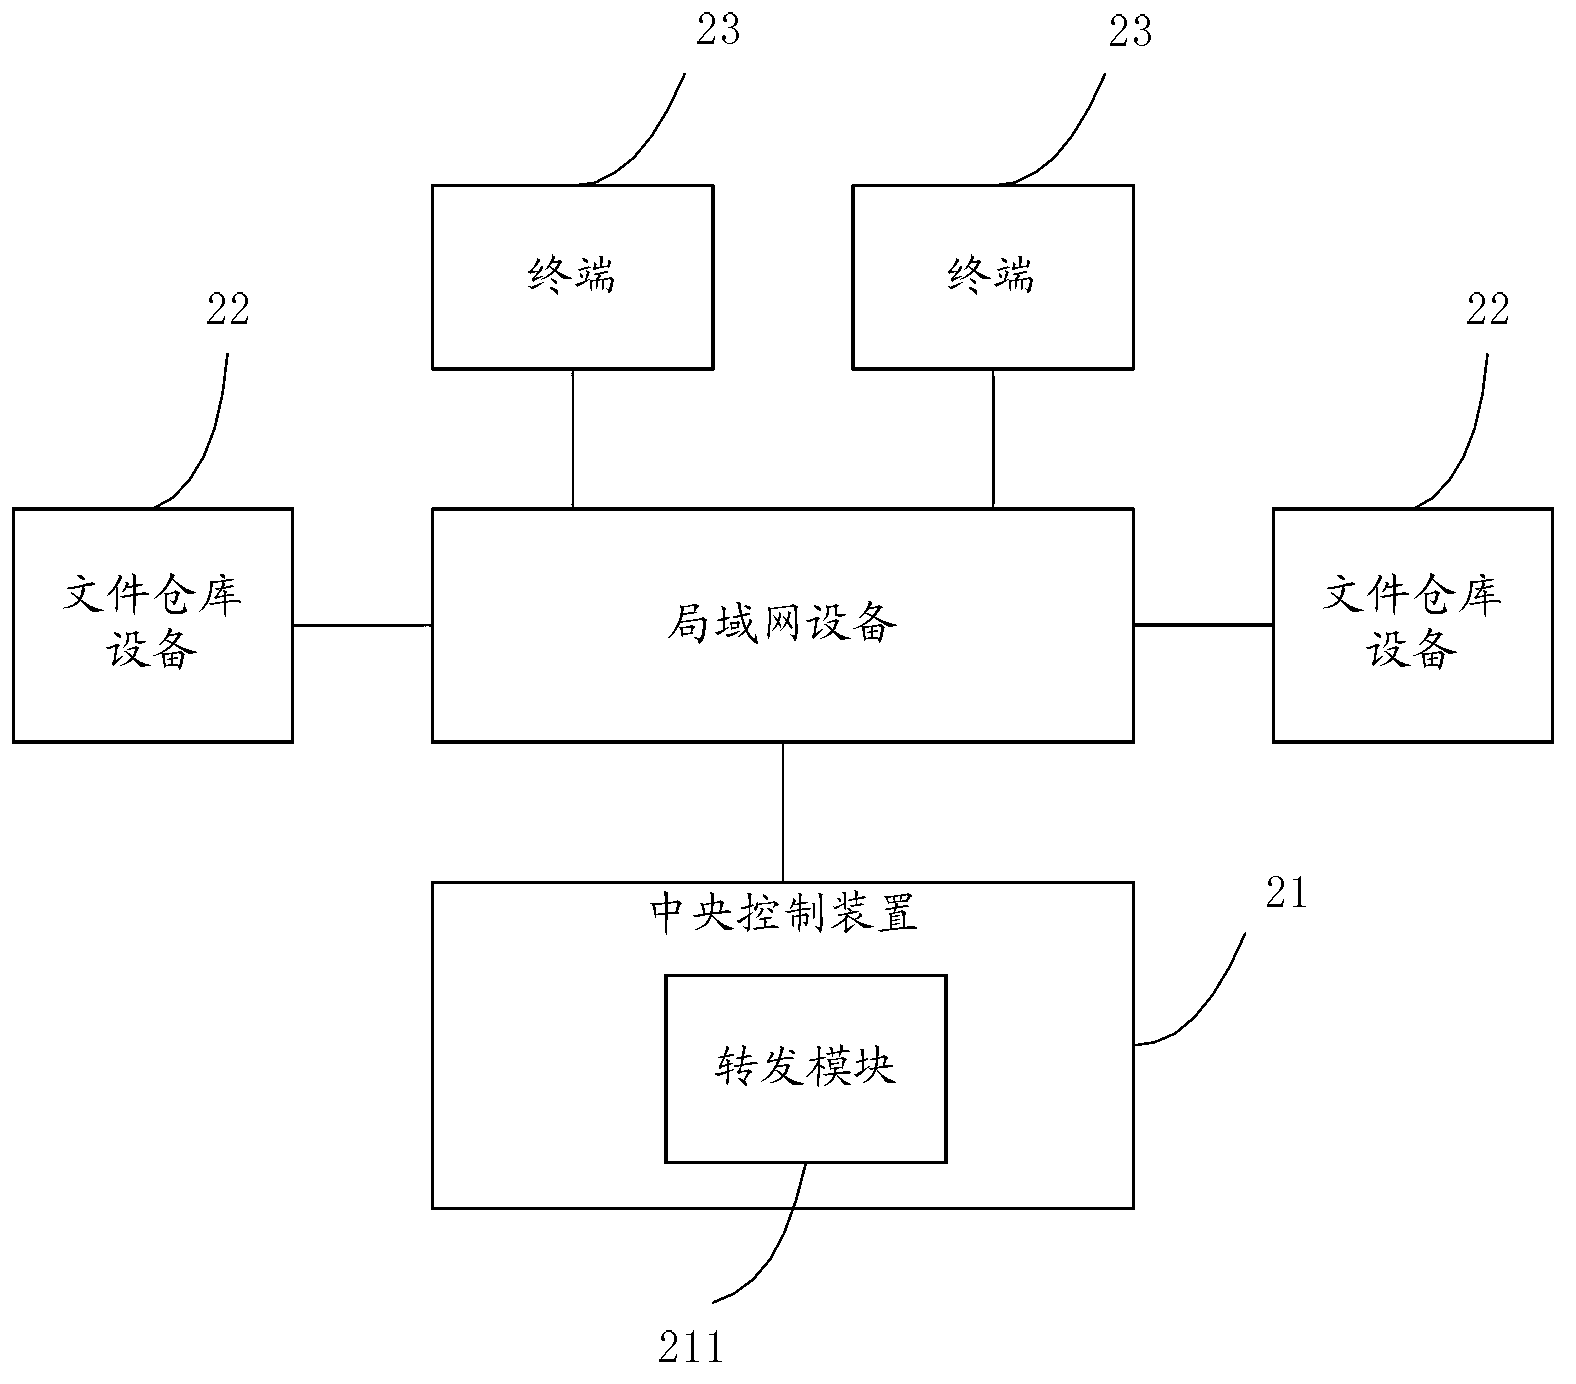 Method and system of file management